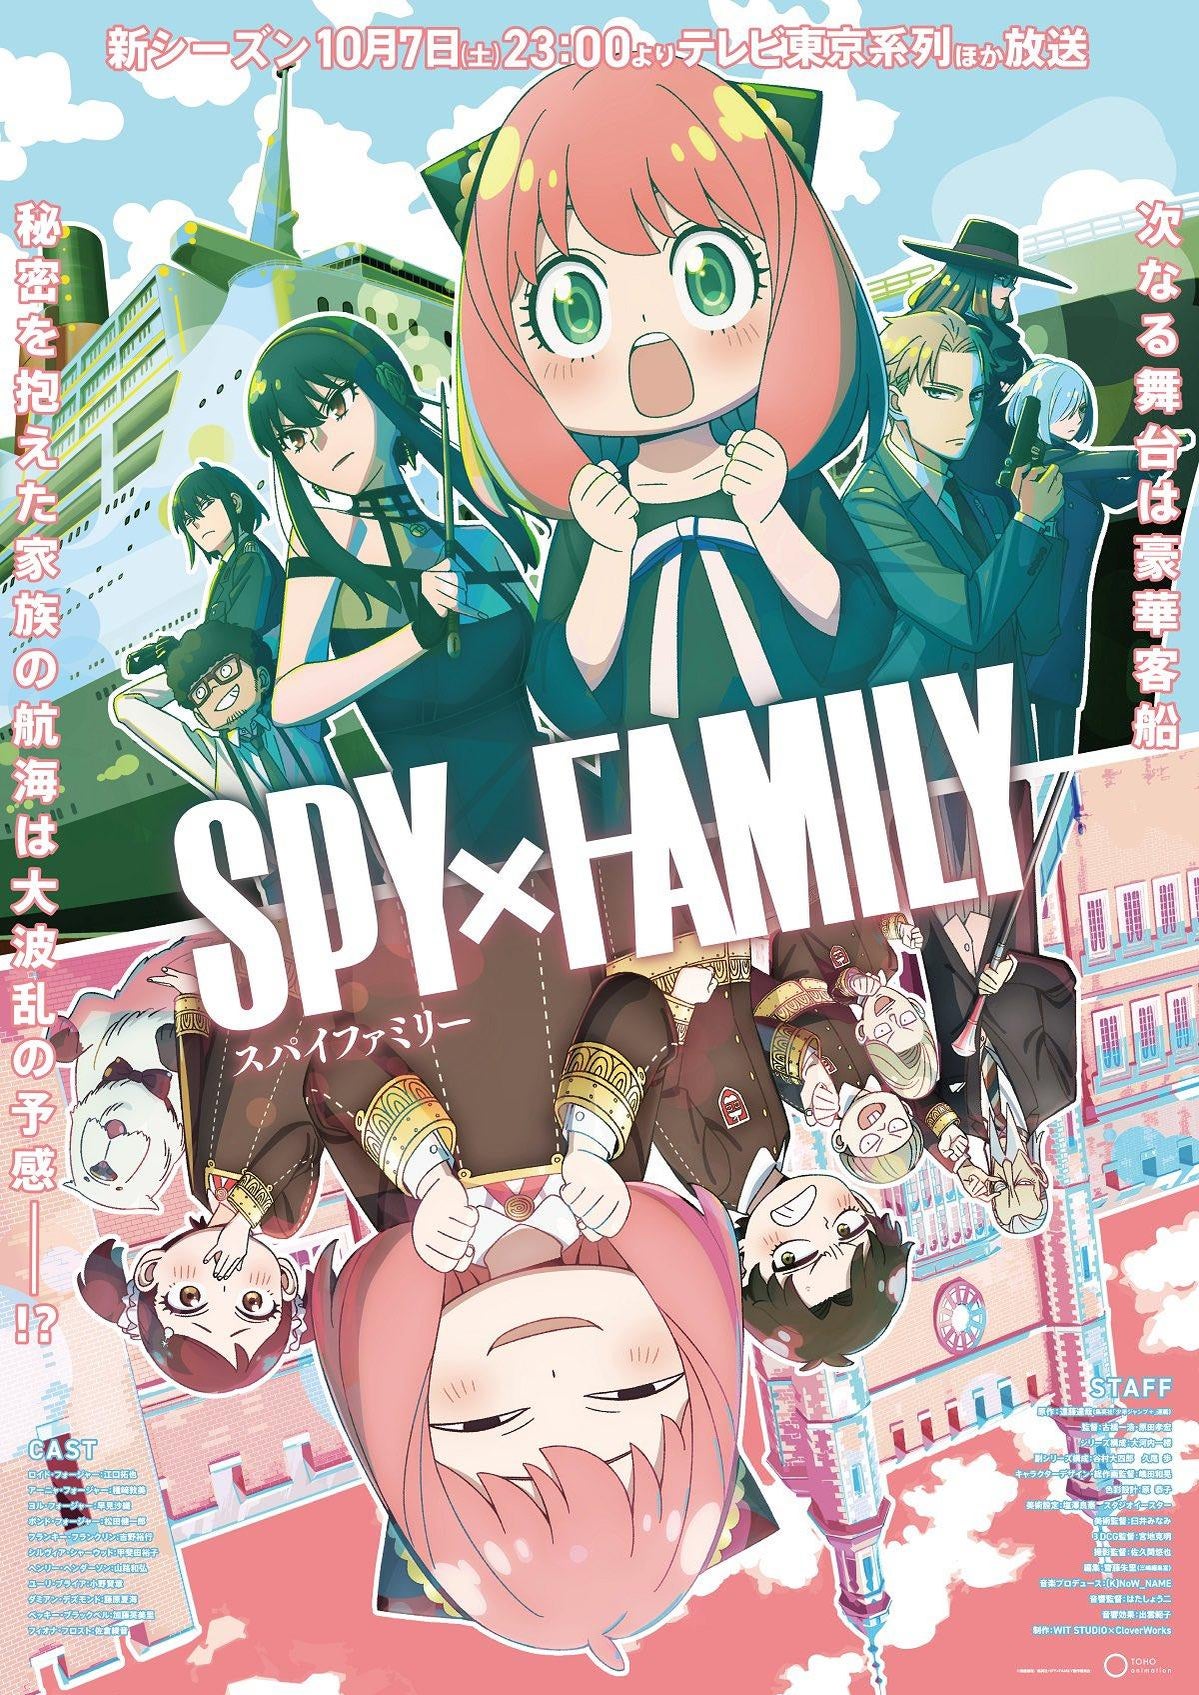 Spy x Family Season 2 is back and we're really hyped about it